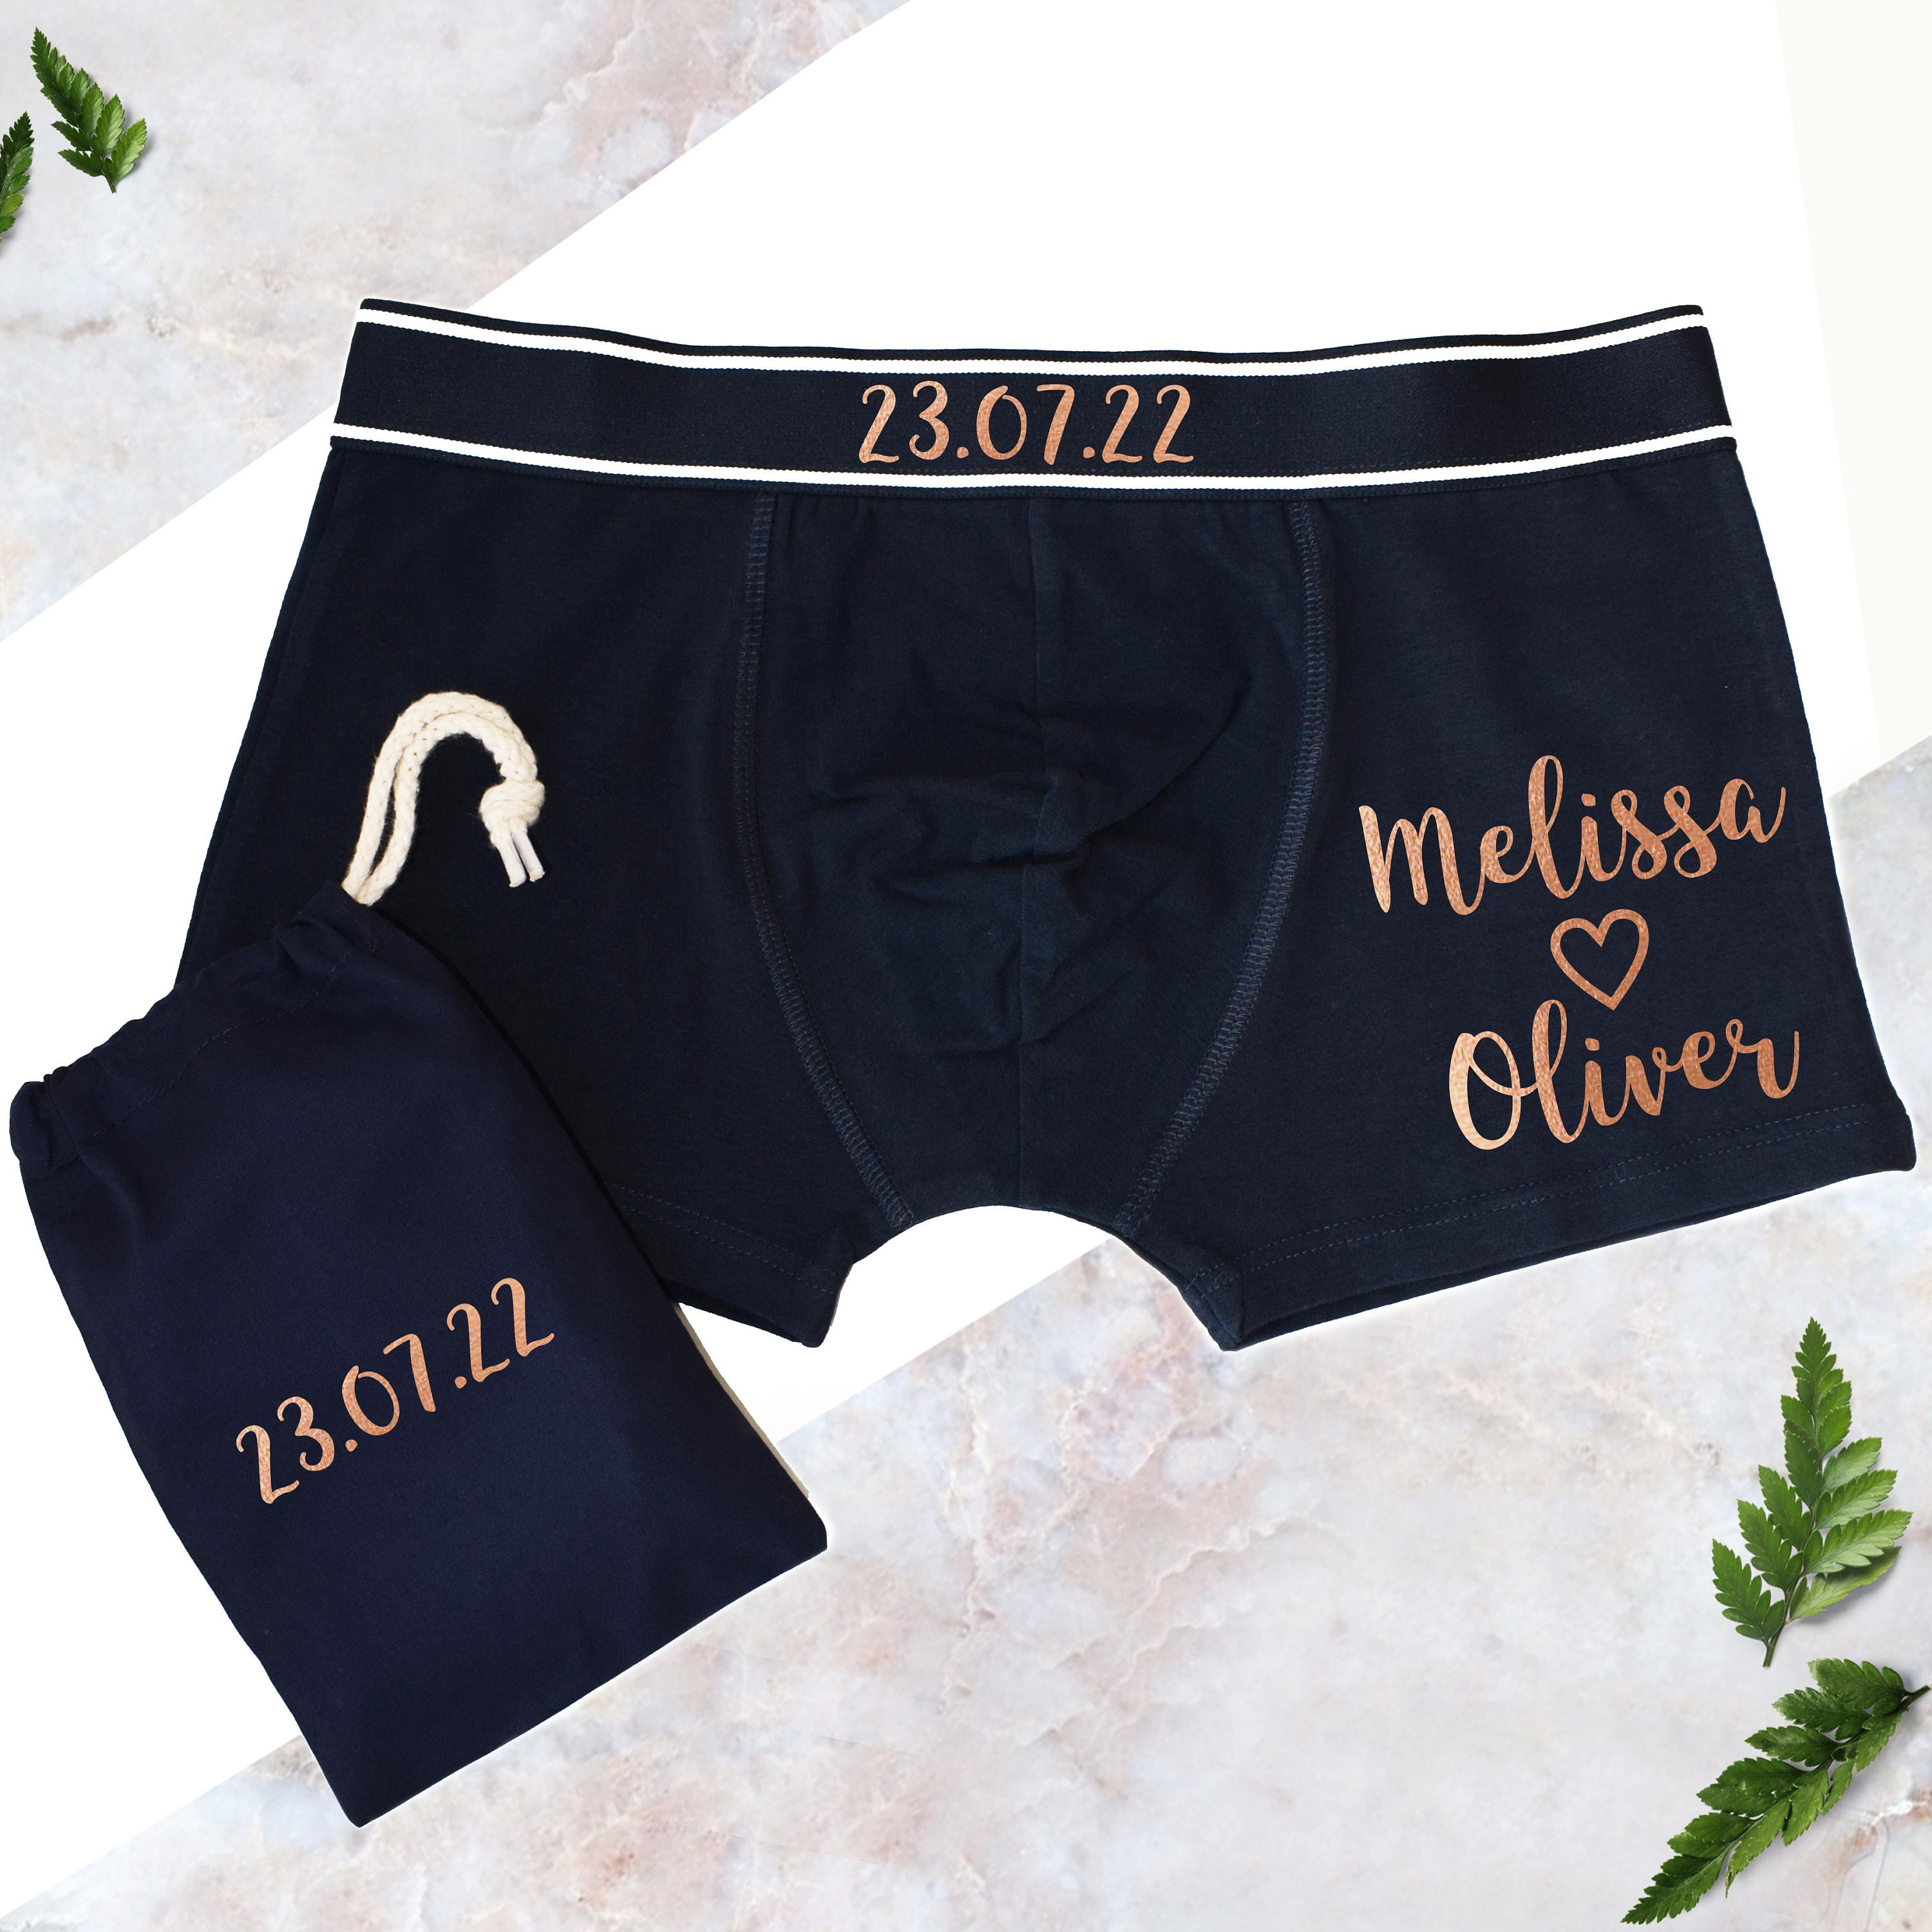 Gorgeous Groom Wedding Underwear Gift Set – Weasel and Stoat